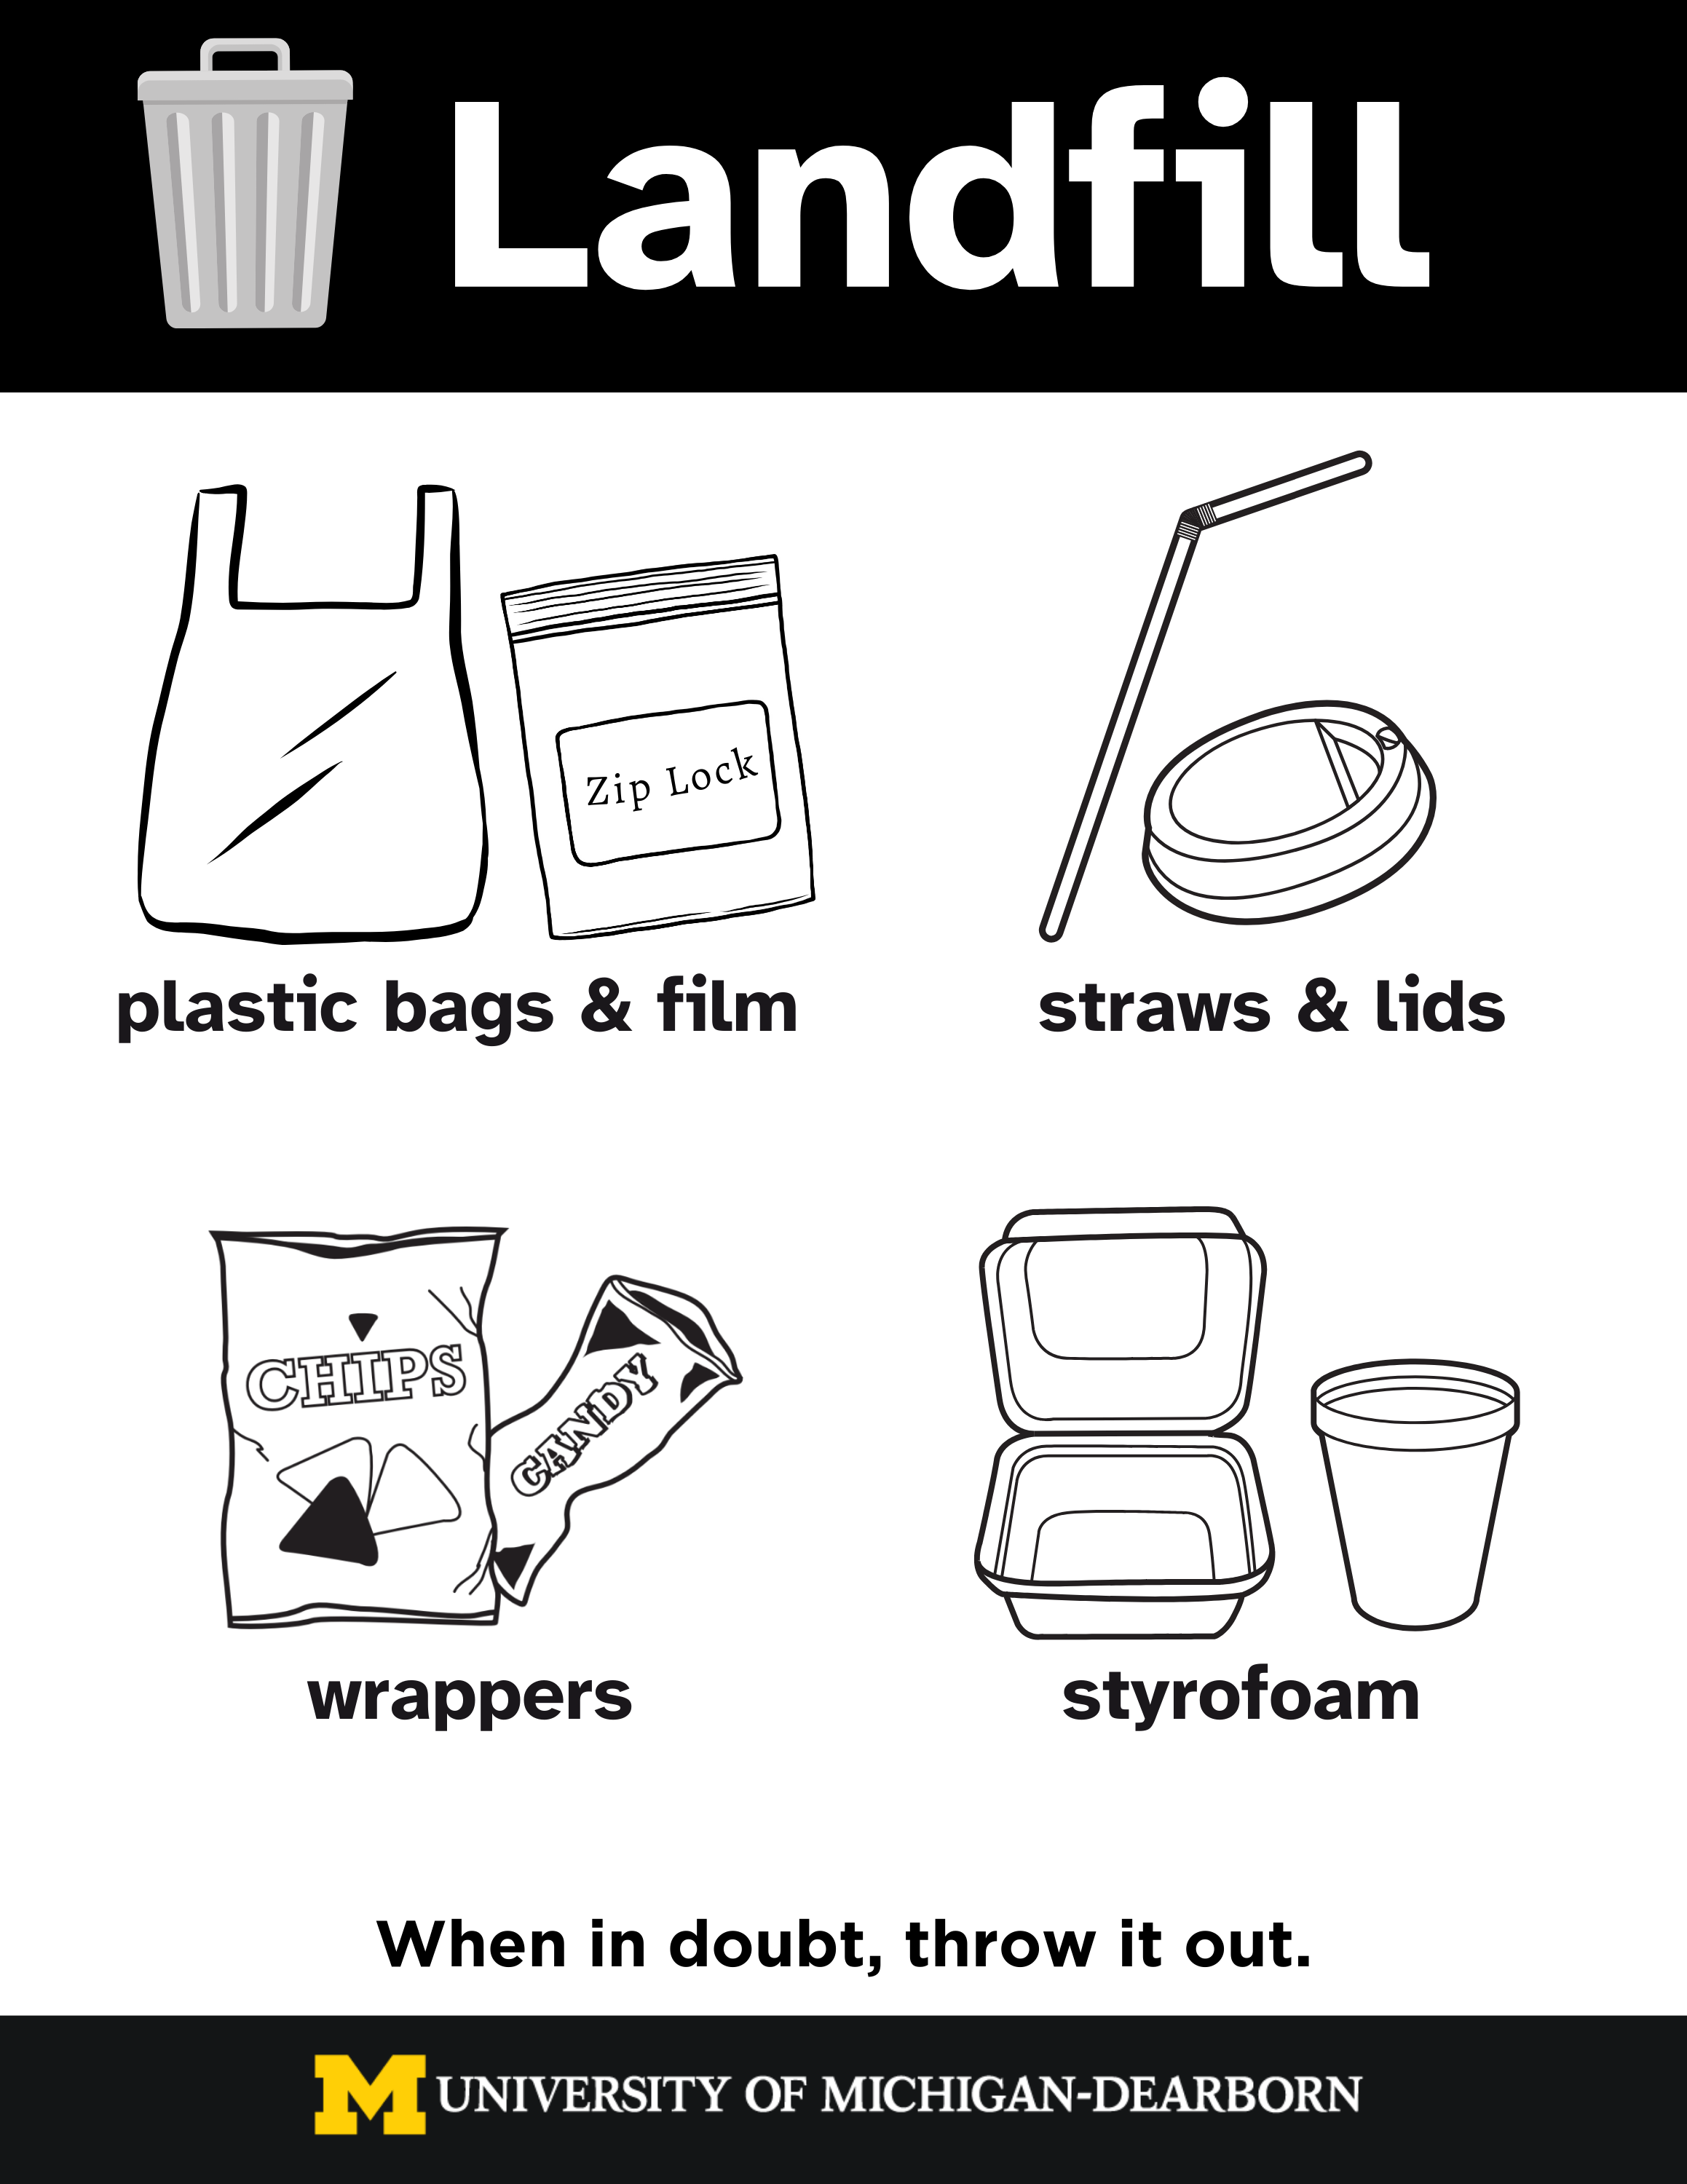 Campus wide landfill signage to inform public about what belongs in landfill waste stream bin